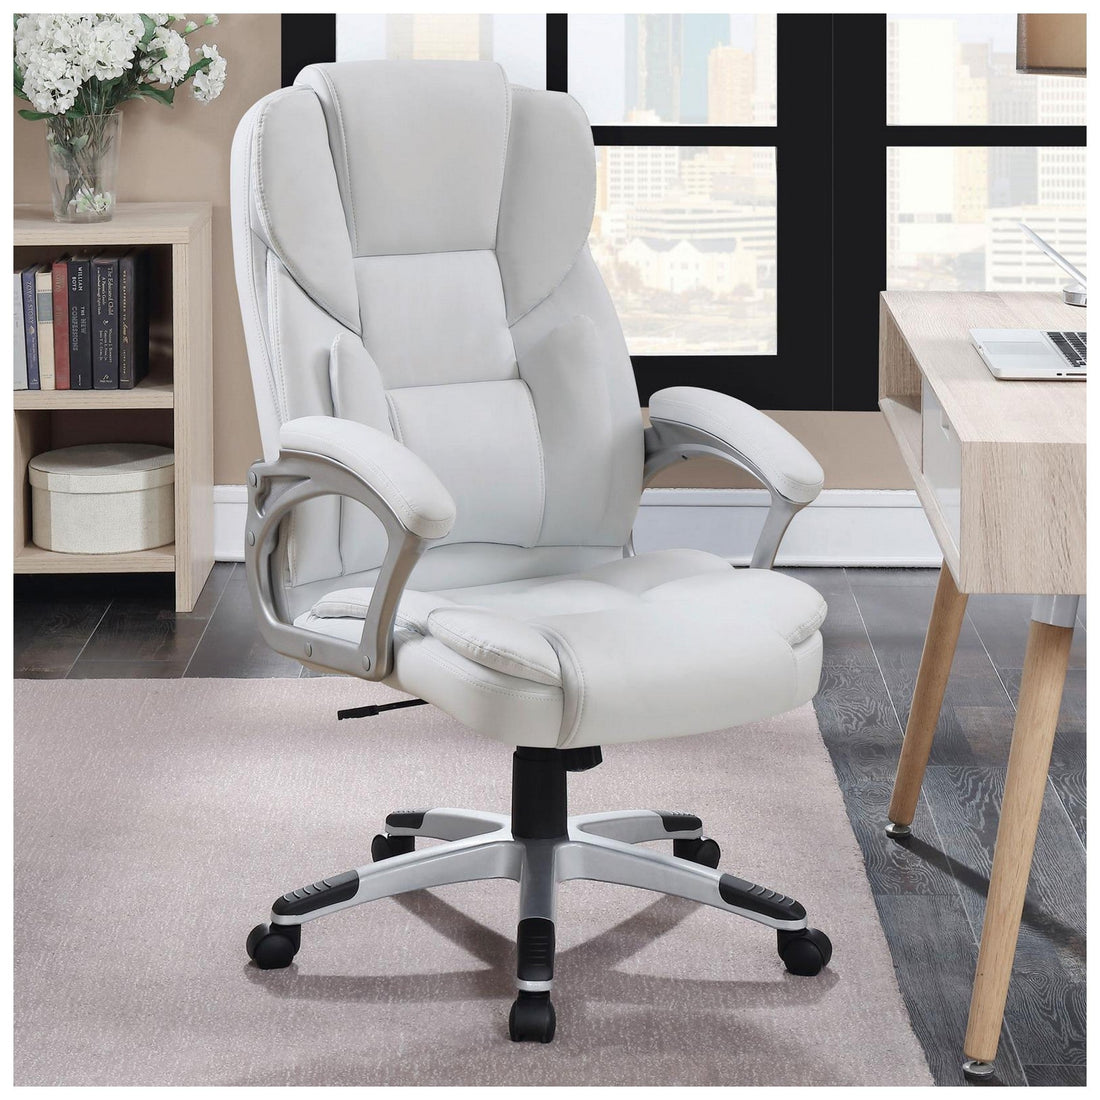 Kaffir Adjustable Height Office Chair White and Silver 801140